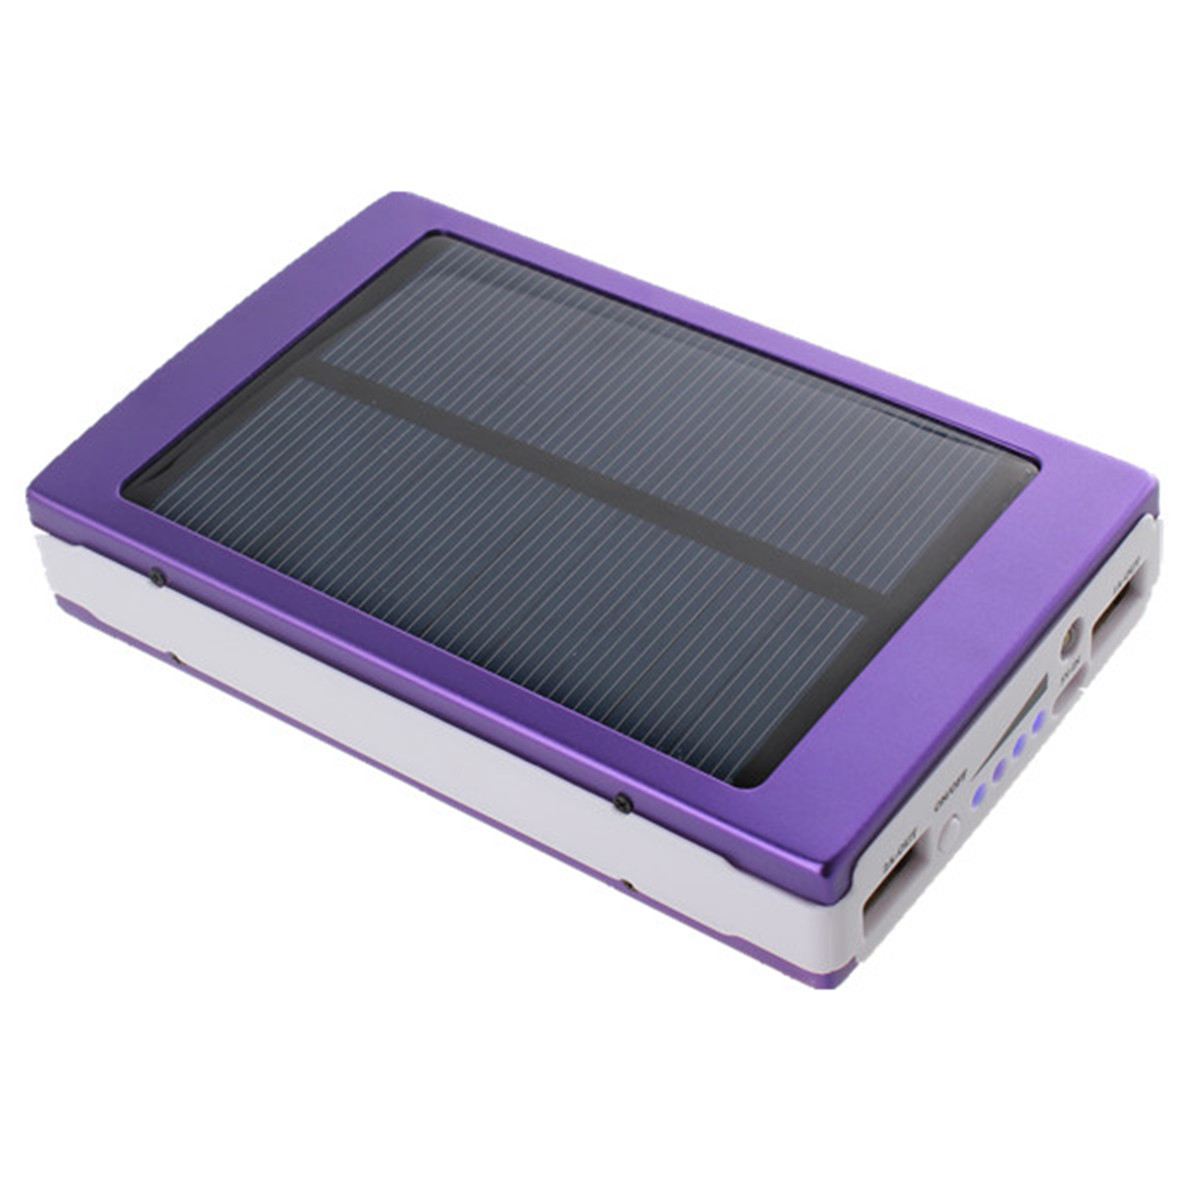 Portable-Solar-Panel-Dual-USB-External-Mobile-Battery-Power-Bank-Pack-Charger-for-iPhone-HTC-1419461-9